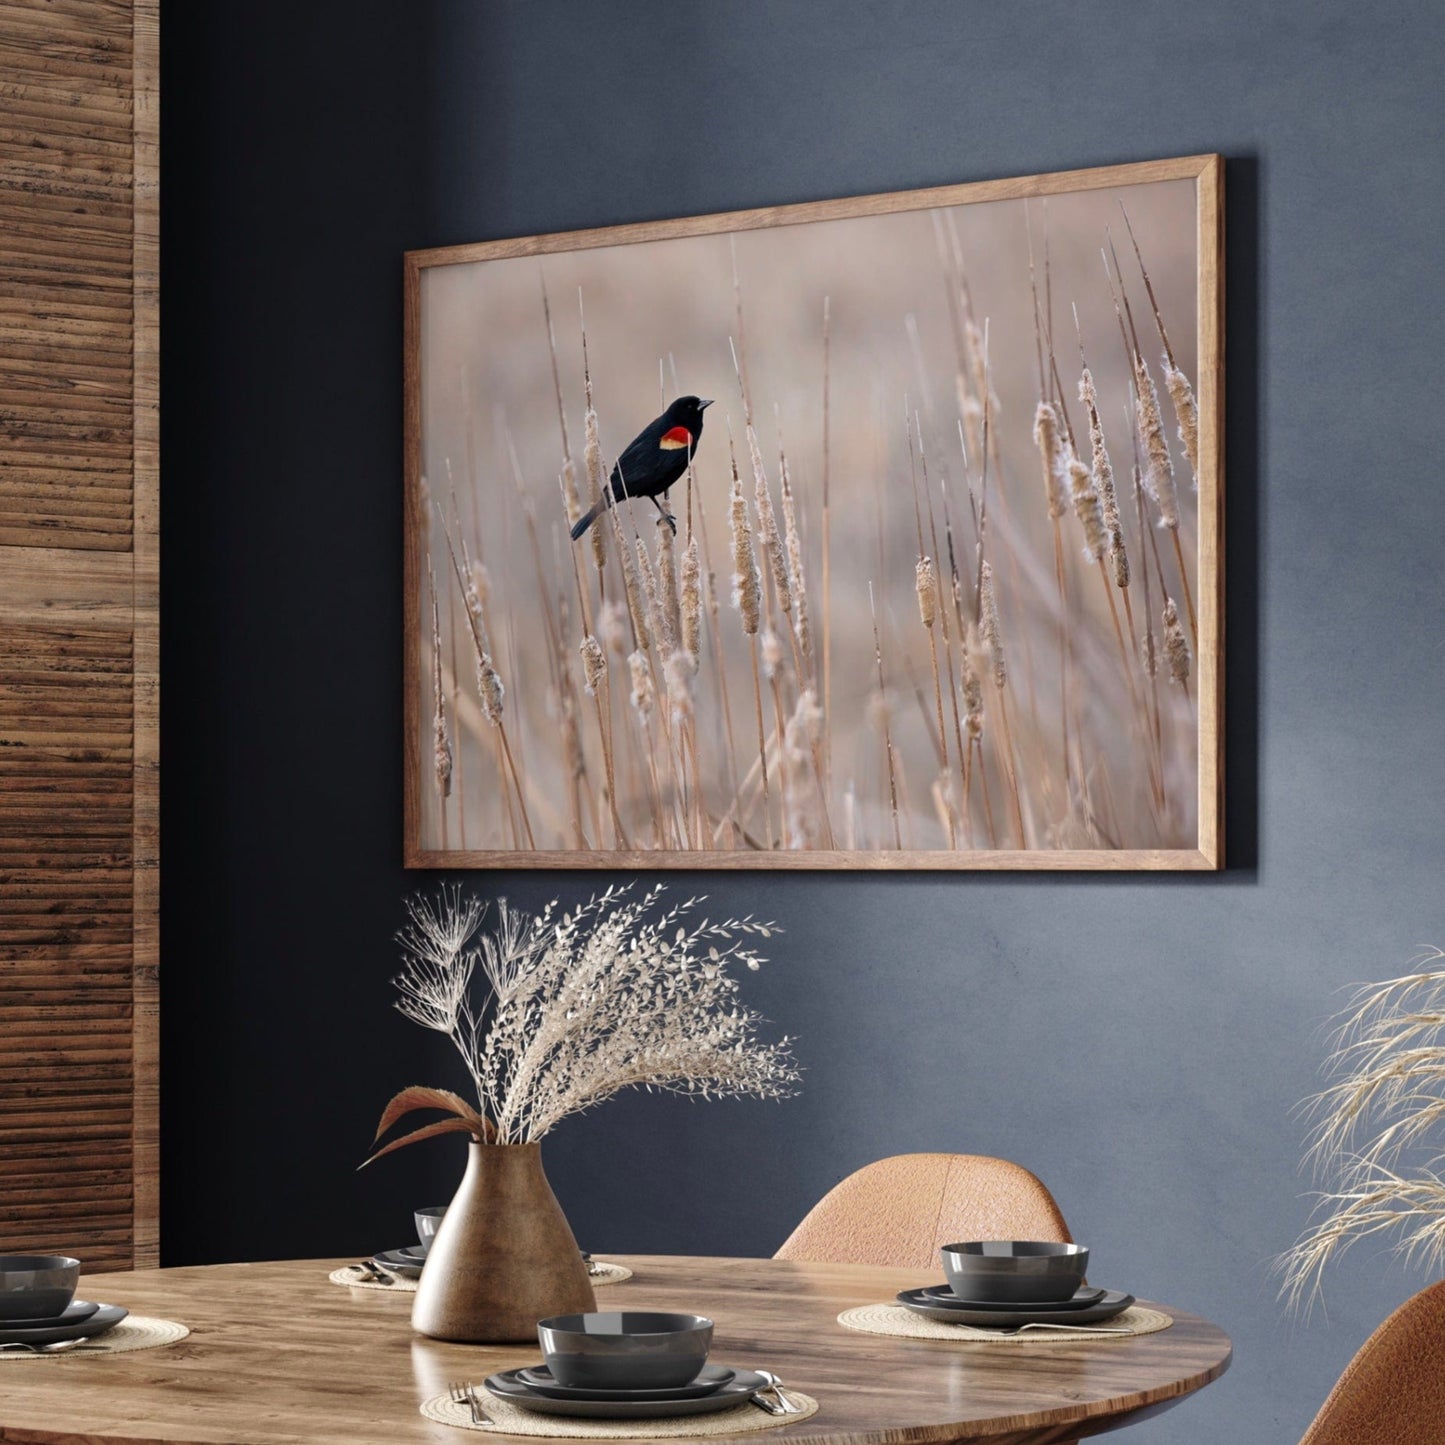 Red-Winged Blackbird on Cattails Wall Art Teri James Photography